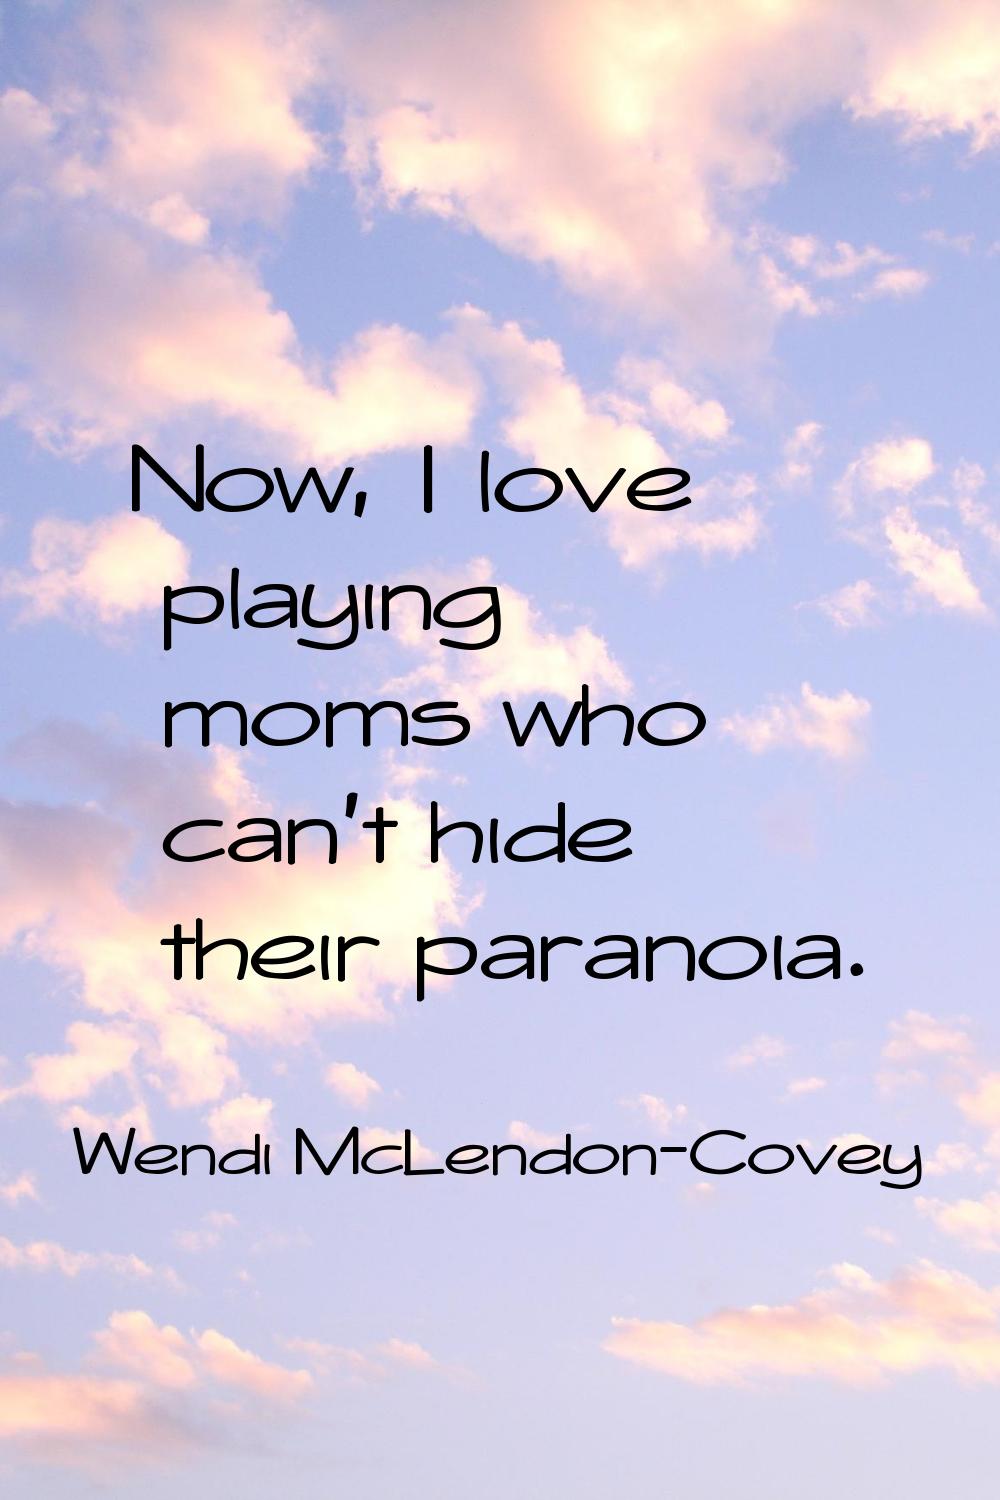 Now, I love playing moms who can't hide their paranoia.